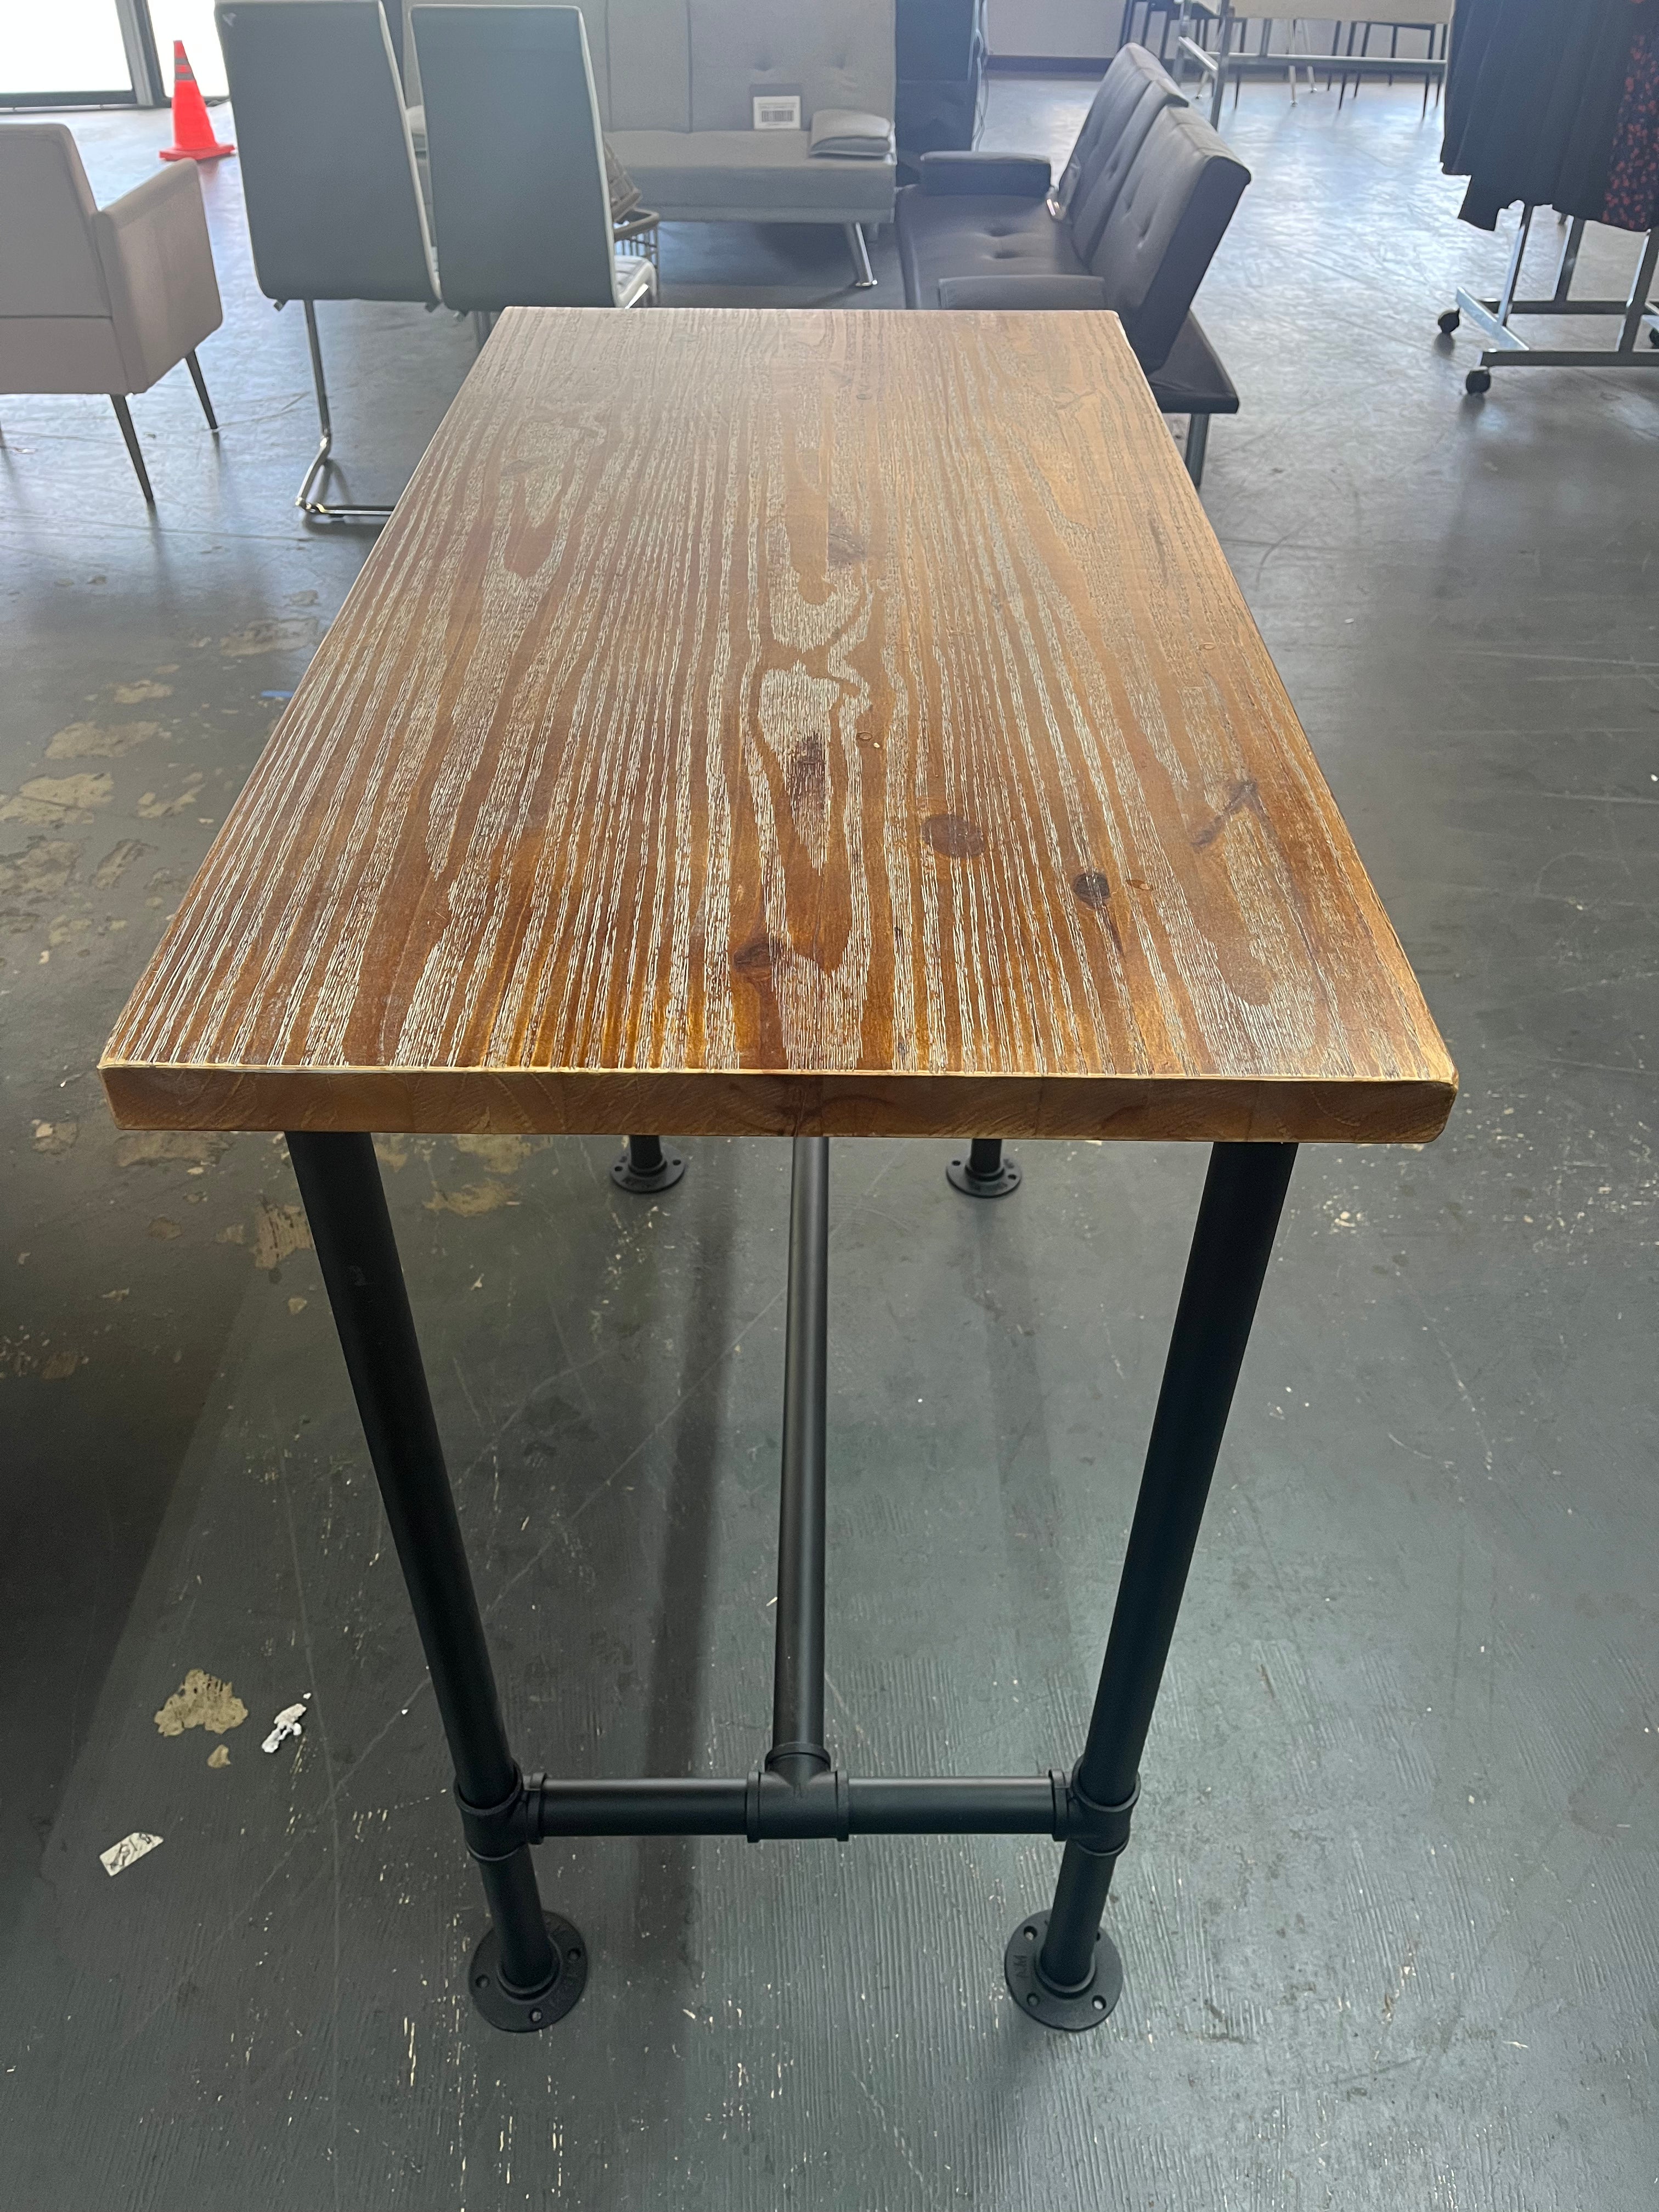 Diwhy DIY Industrial Design Pipe Dining Table Casual Pub BAR Laptop Table Modern Studio Wood and Metal Rectangular Dining Table homeoffice Desk Breakfast high bar Table